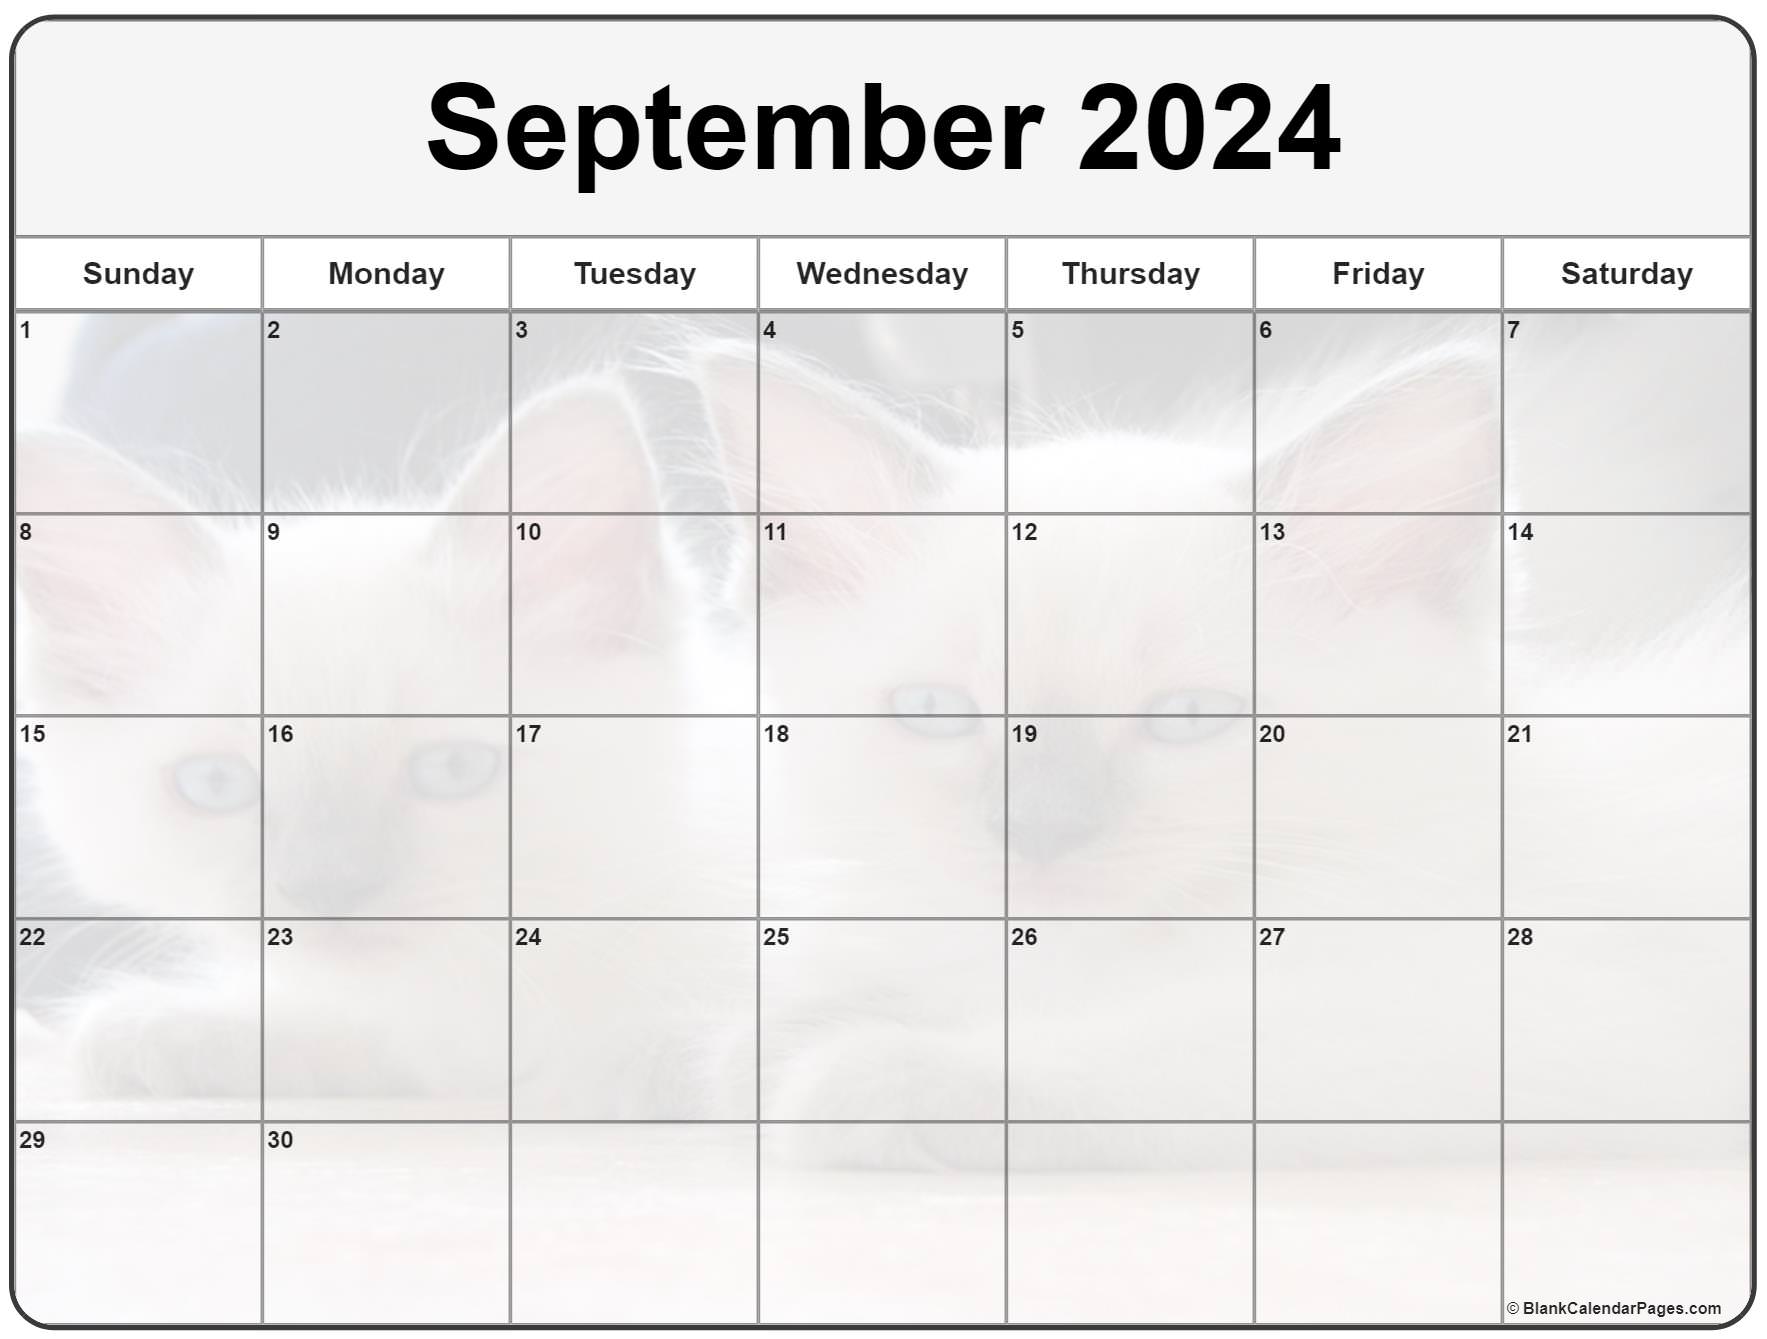 Collection of September 2024 photo calendars with image filters 